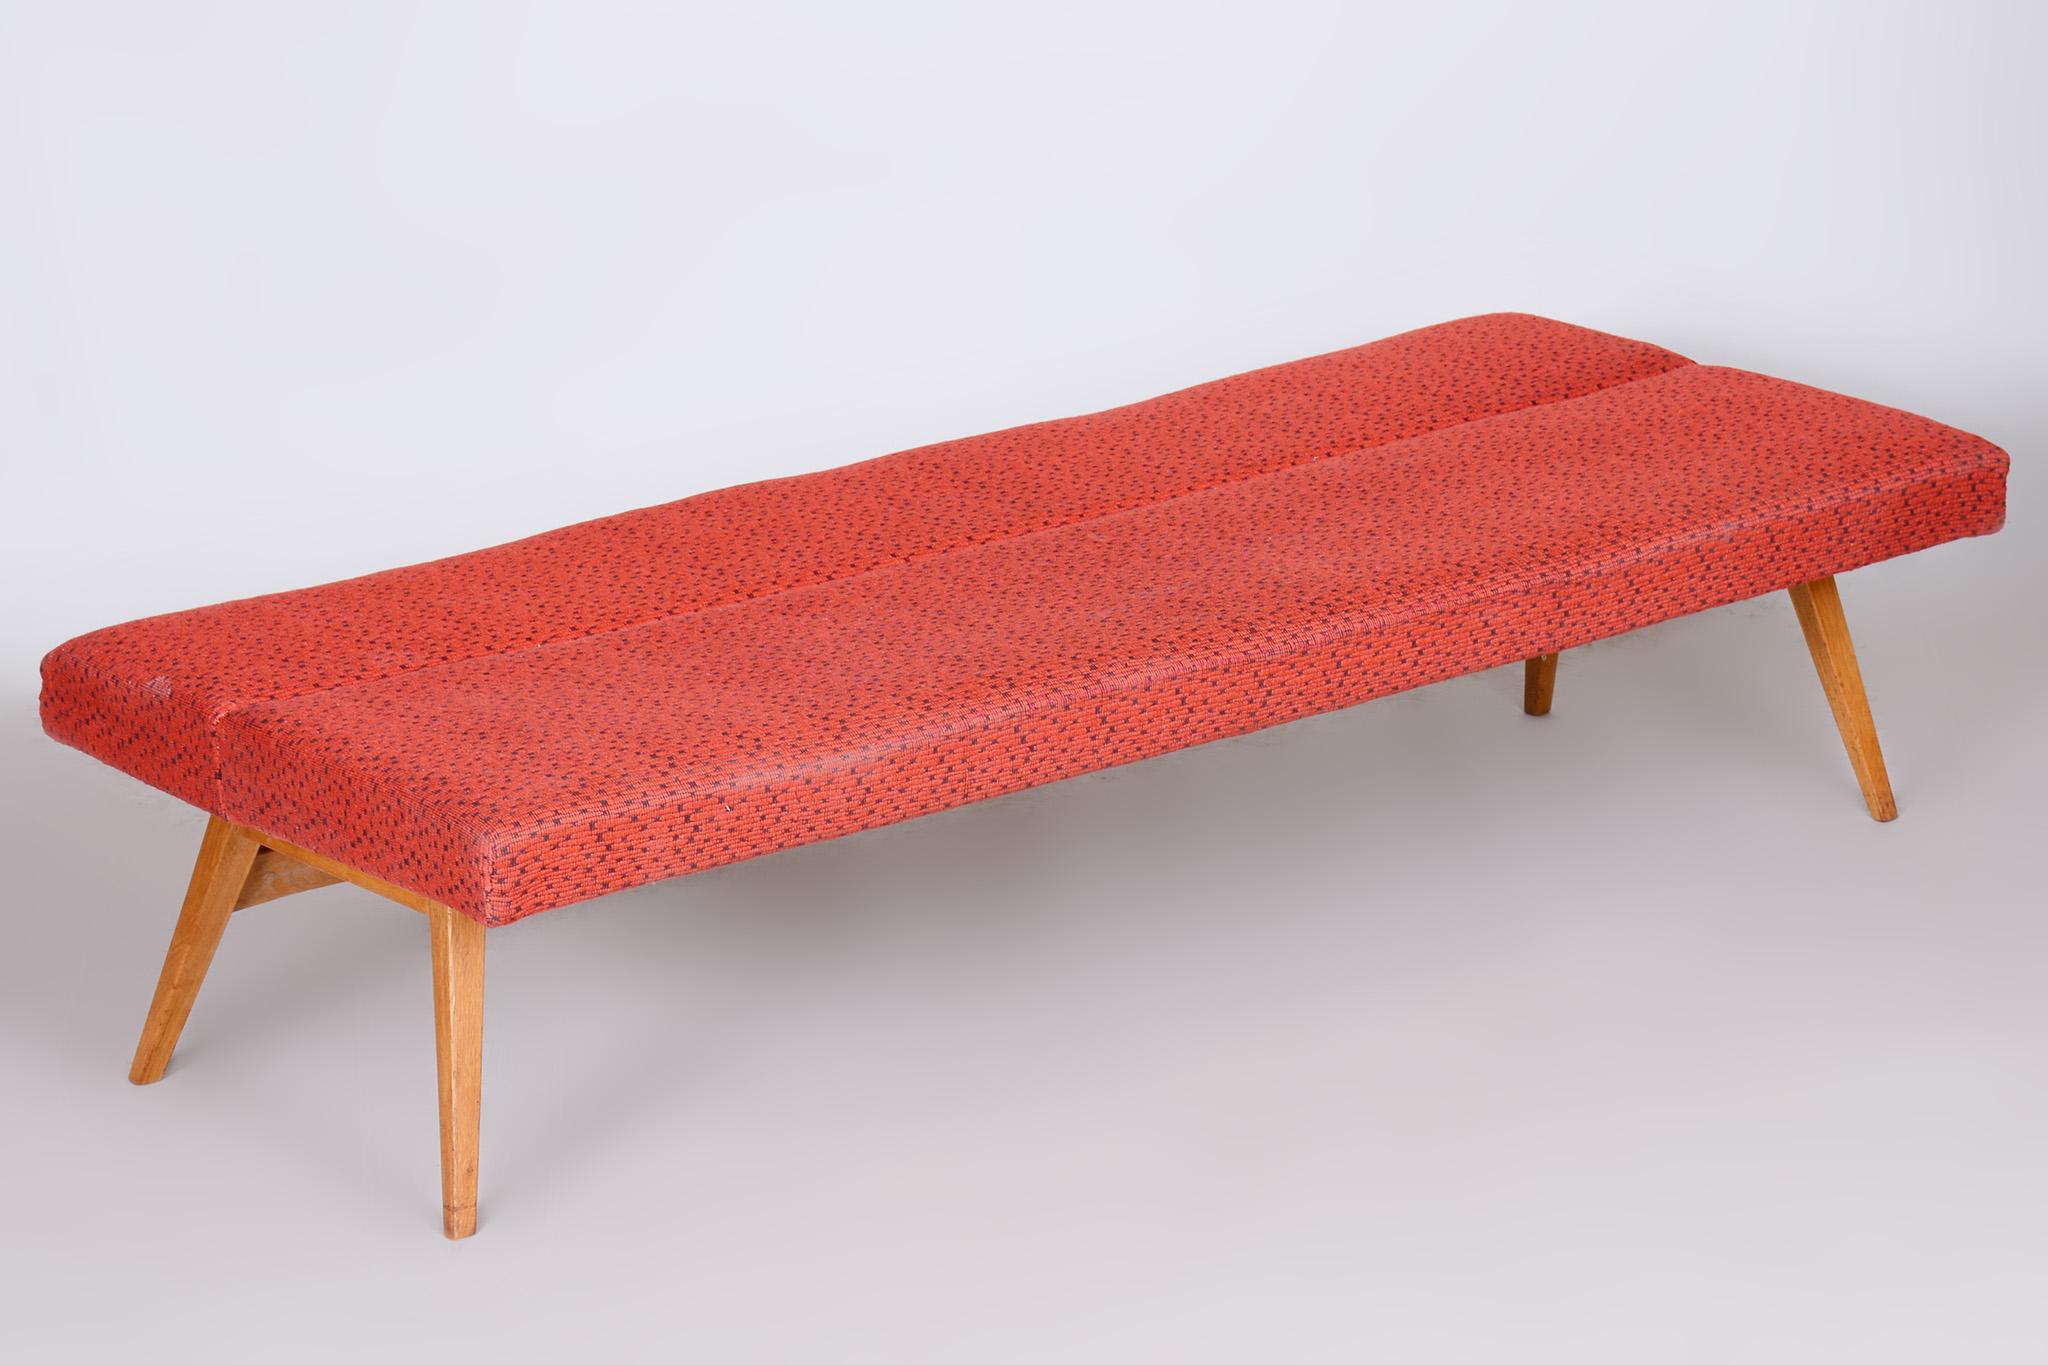 Red Midcentury Modern Oak Sofa, 1950s, Original well preserved upholstery In Good Condition For Sale In Horomerice, CZ